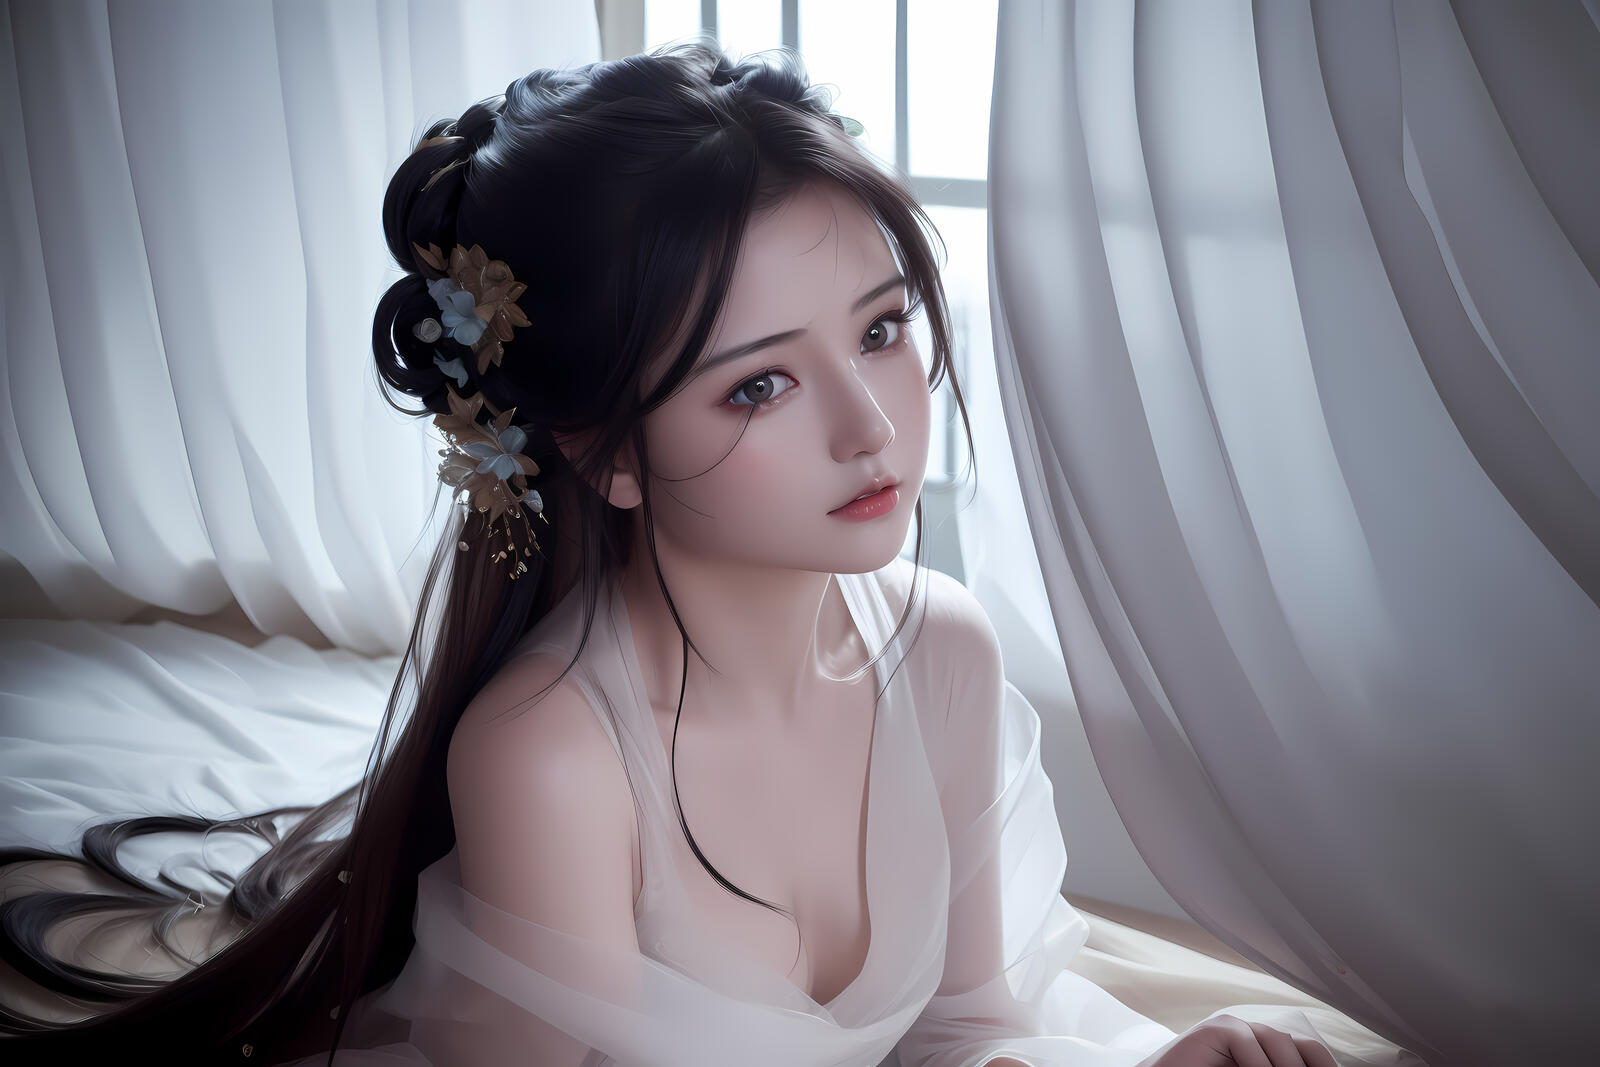 Free photo Rendering of an Asian woman in a white light dress